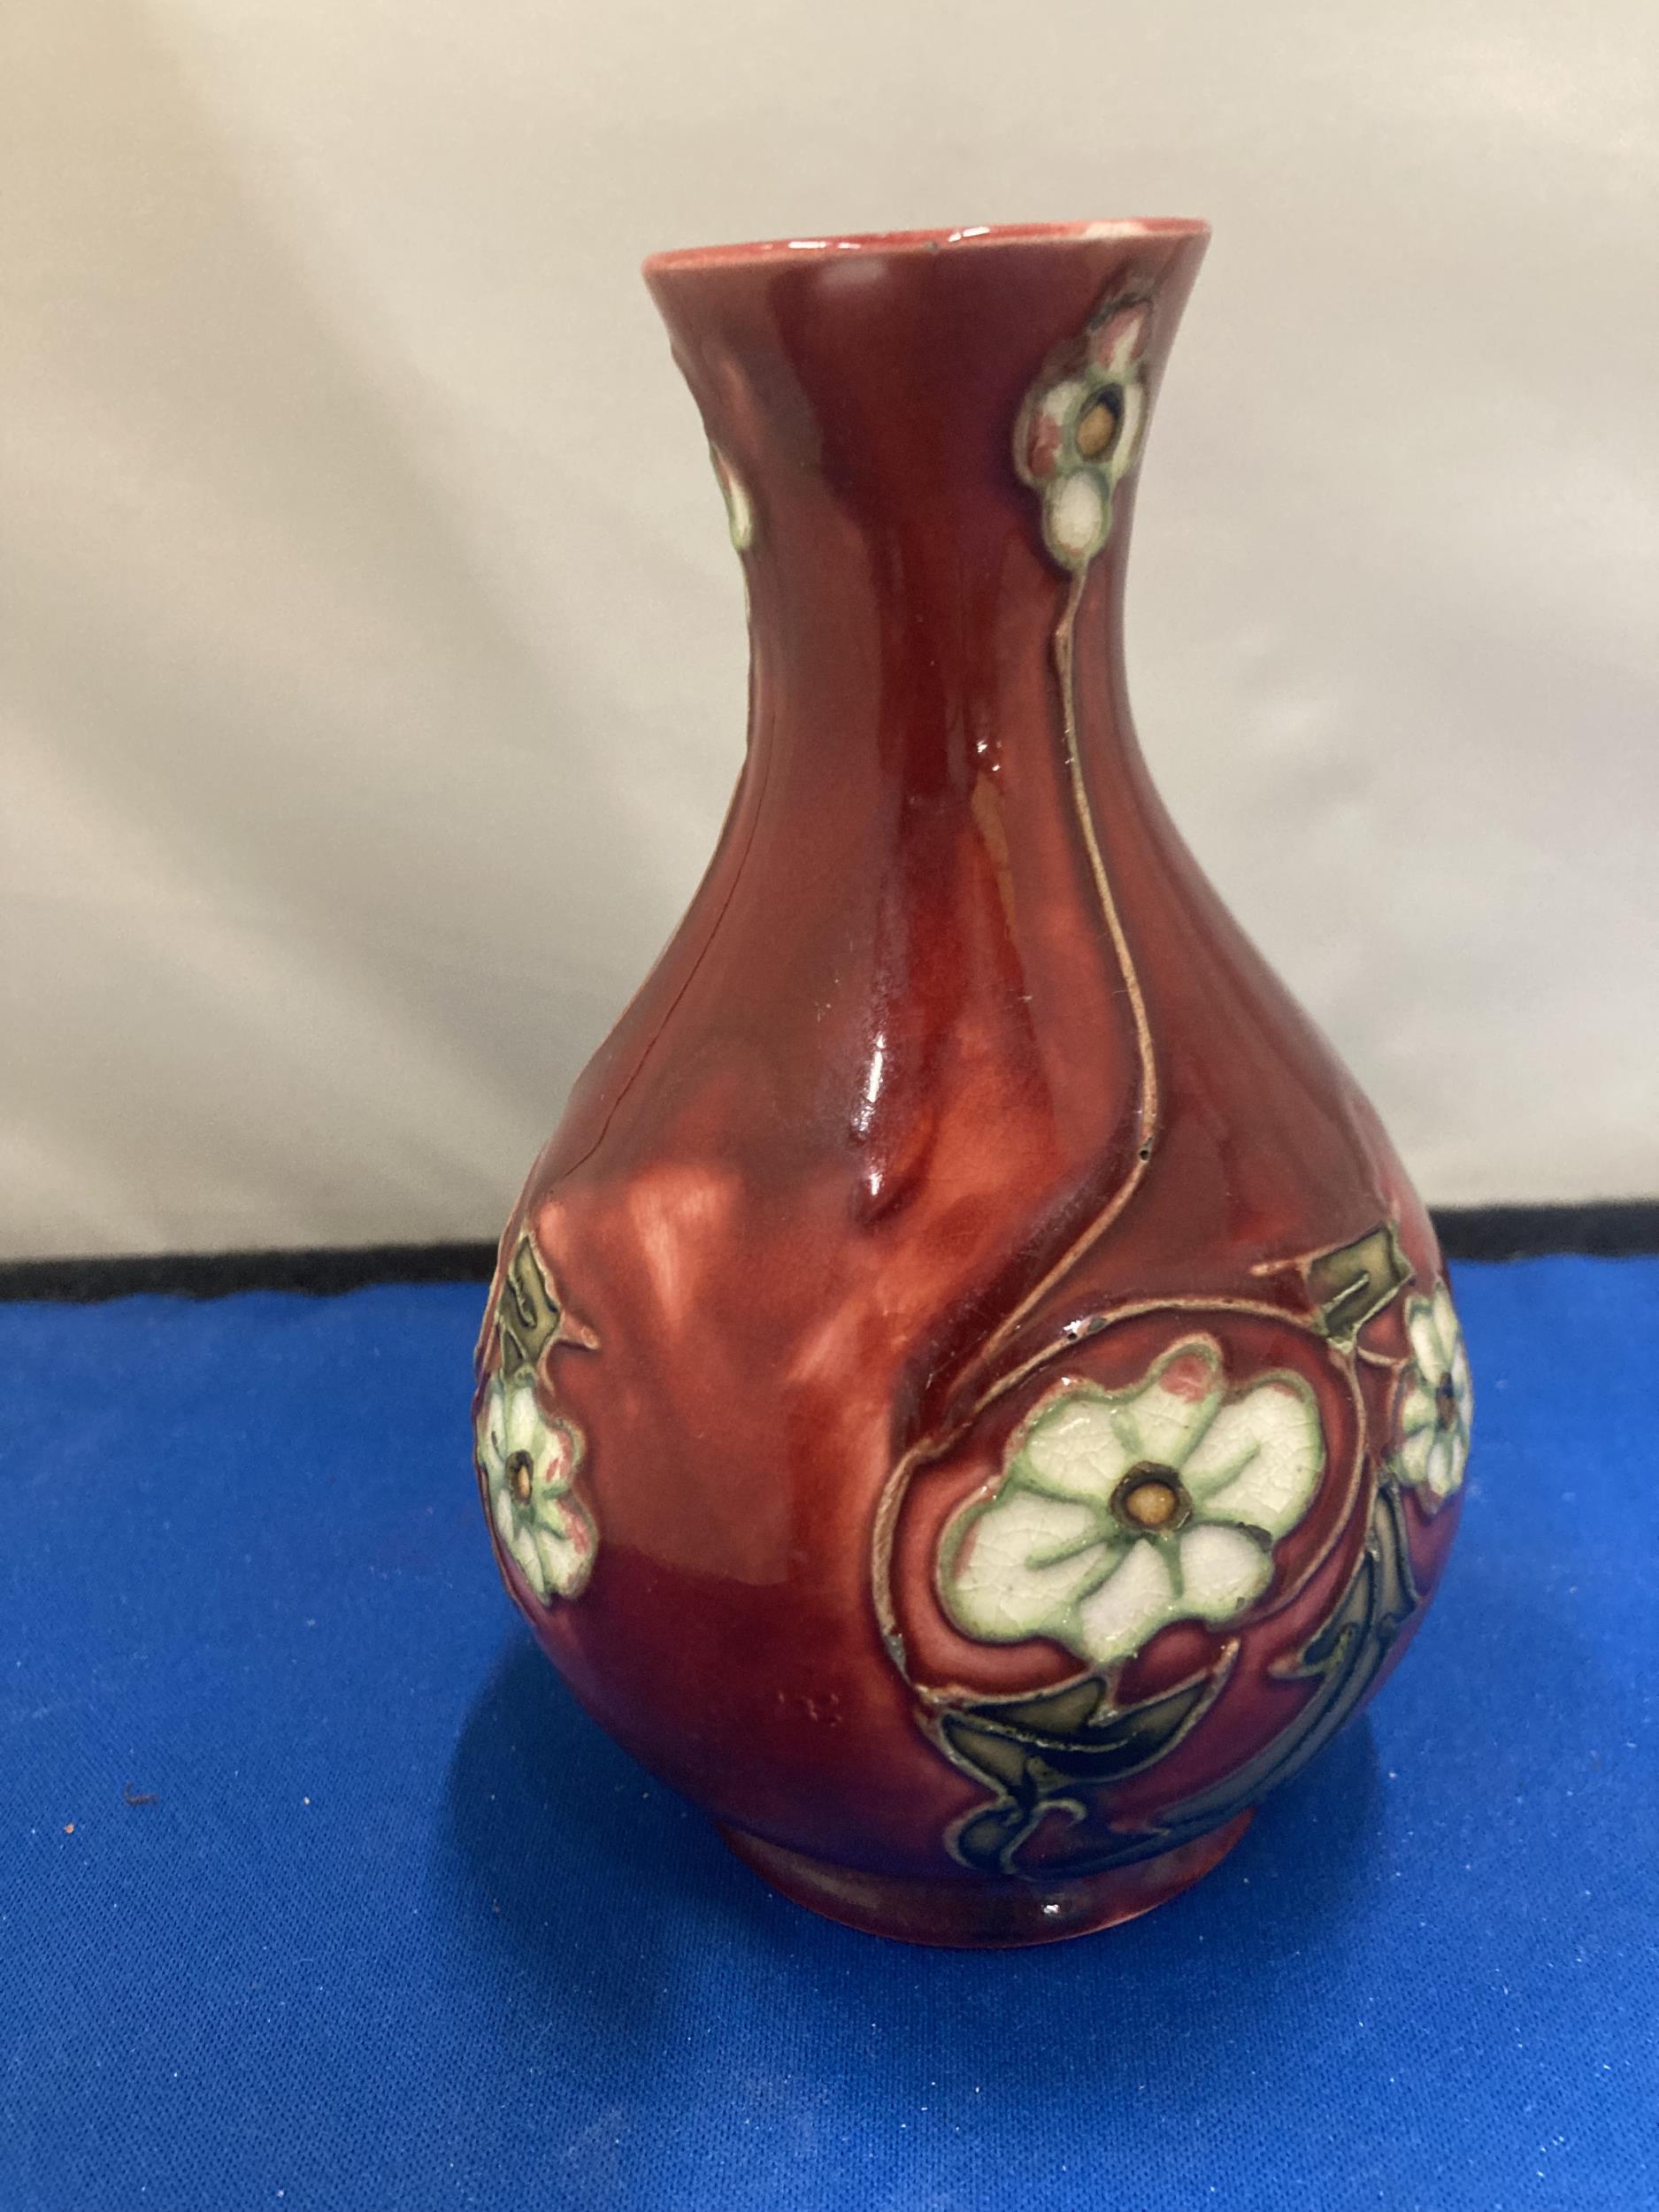 A MINTON SECESSIONIST VASE IN RED WITH CREAM FLOWERS CIRCA 1910 MARKED TO THE BASE MINTONS LTD No 33 - Image 2 of 4